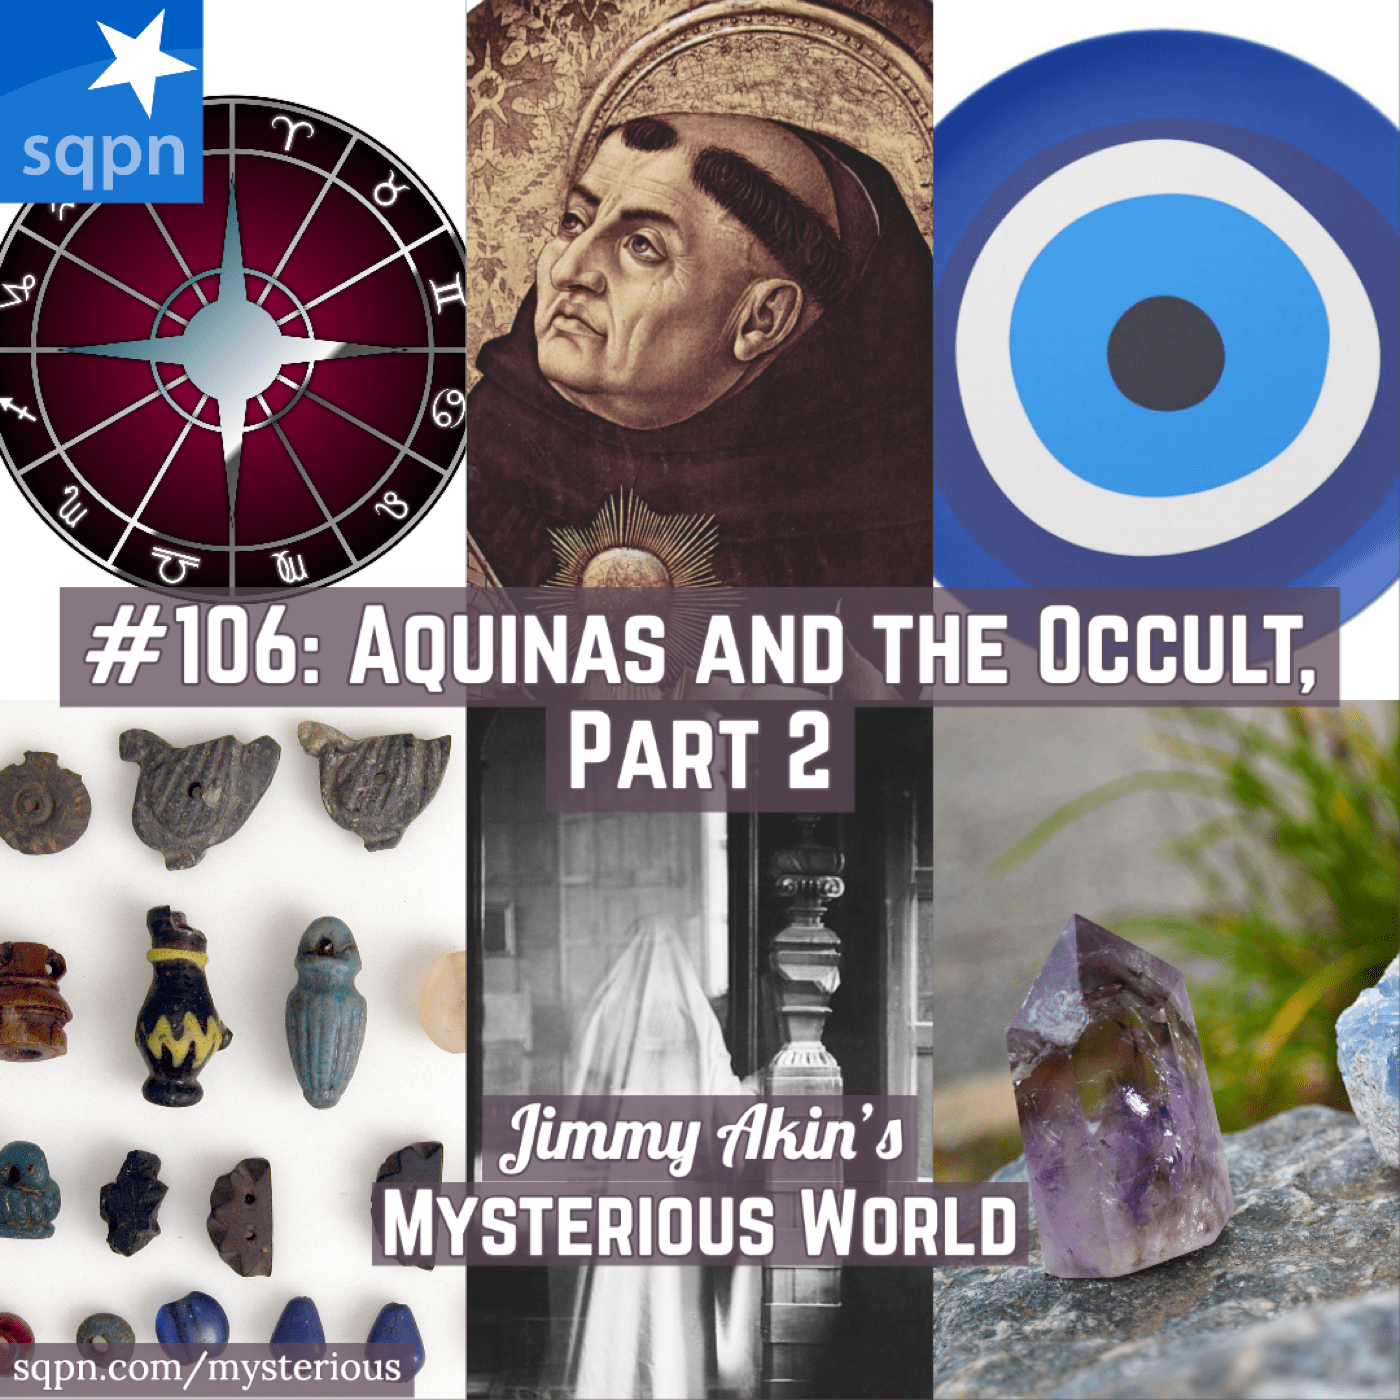 St. Thomas Aquinas and the Occult, Part 2